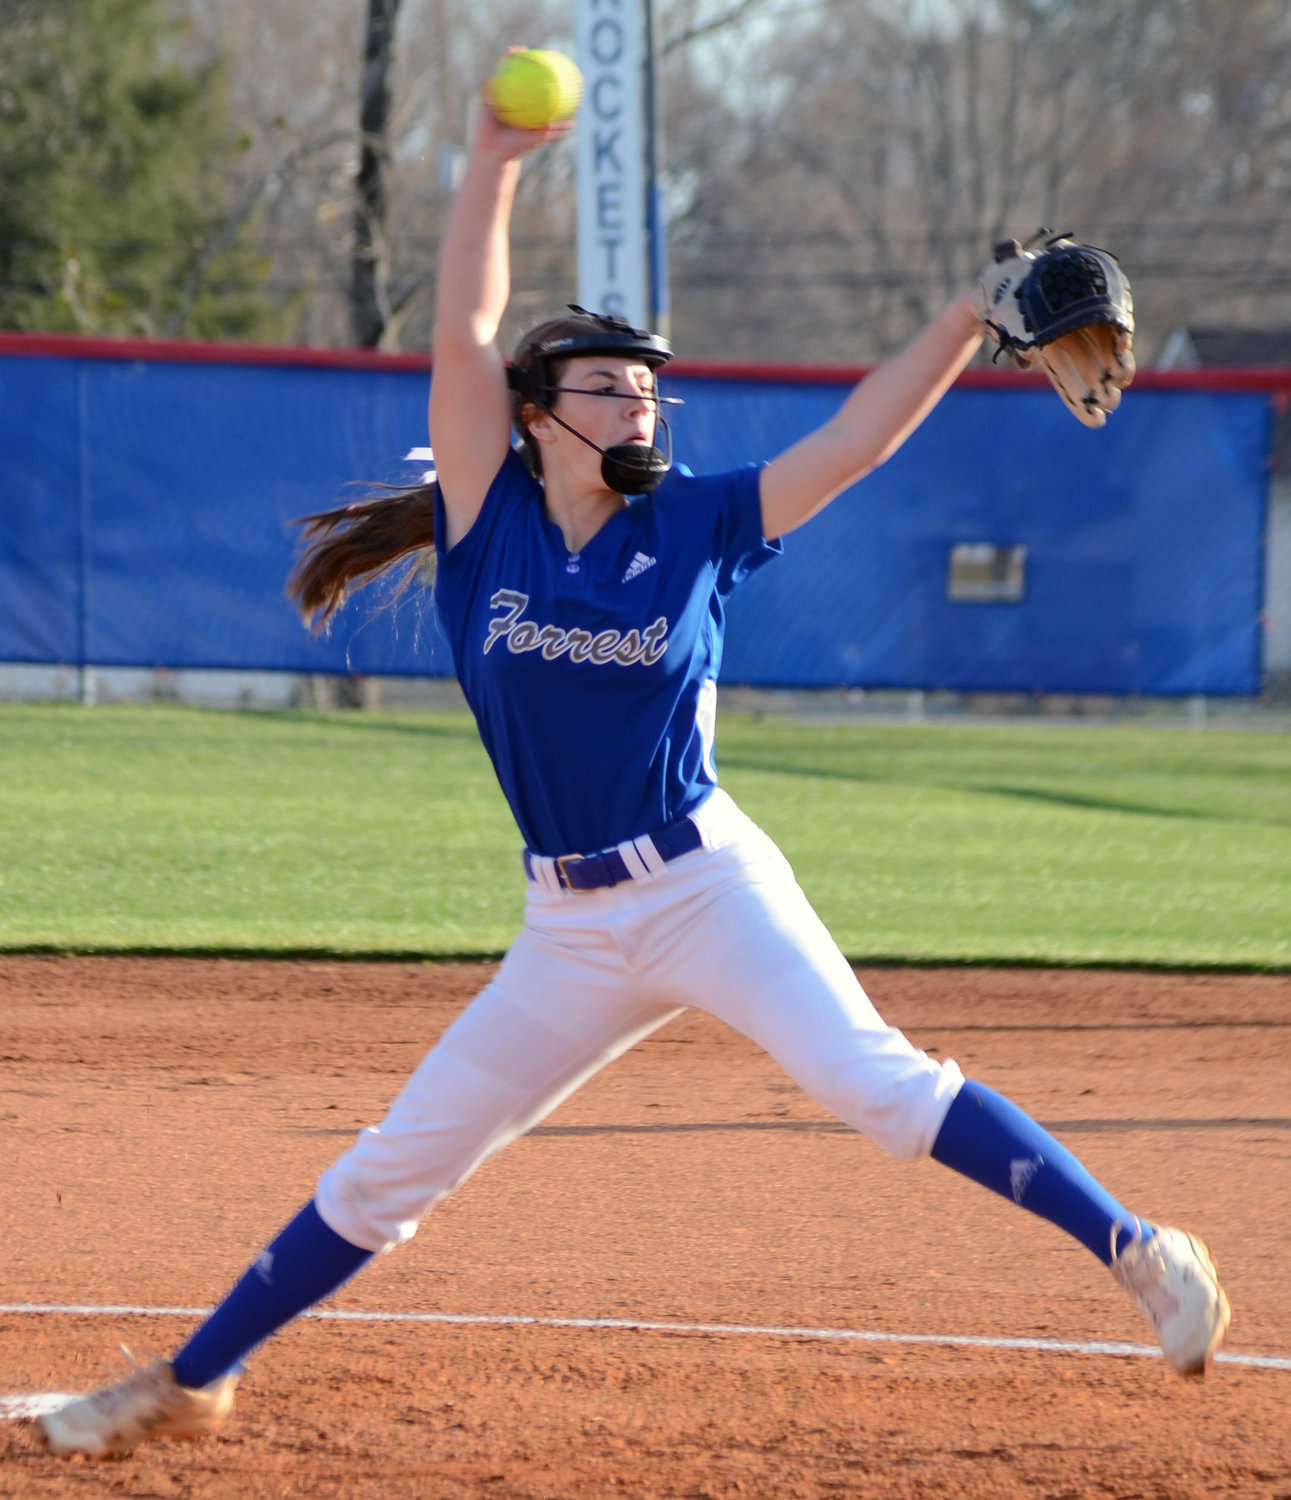 Freshman Emory Hall picked up the win in the circle for the Lady Rockets.